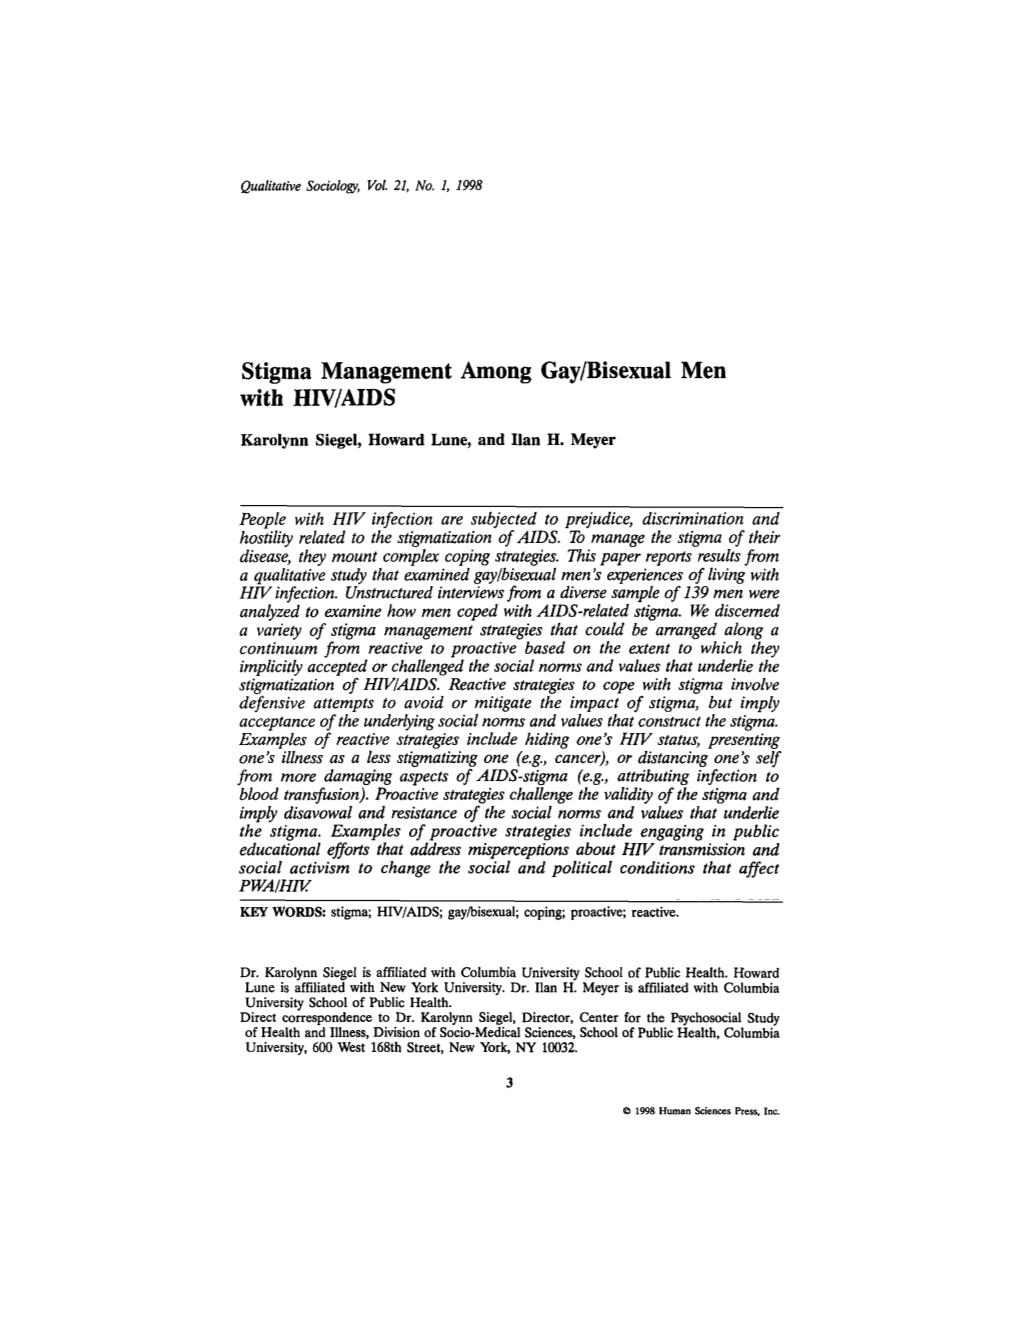 Stigma Management Among Gay/Bisexual Men with HIV/AIDS